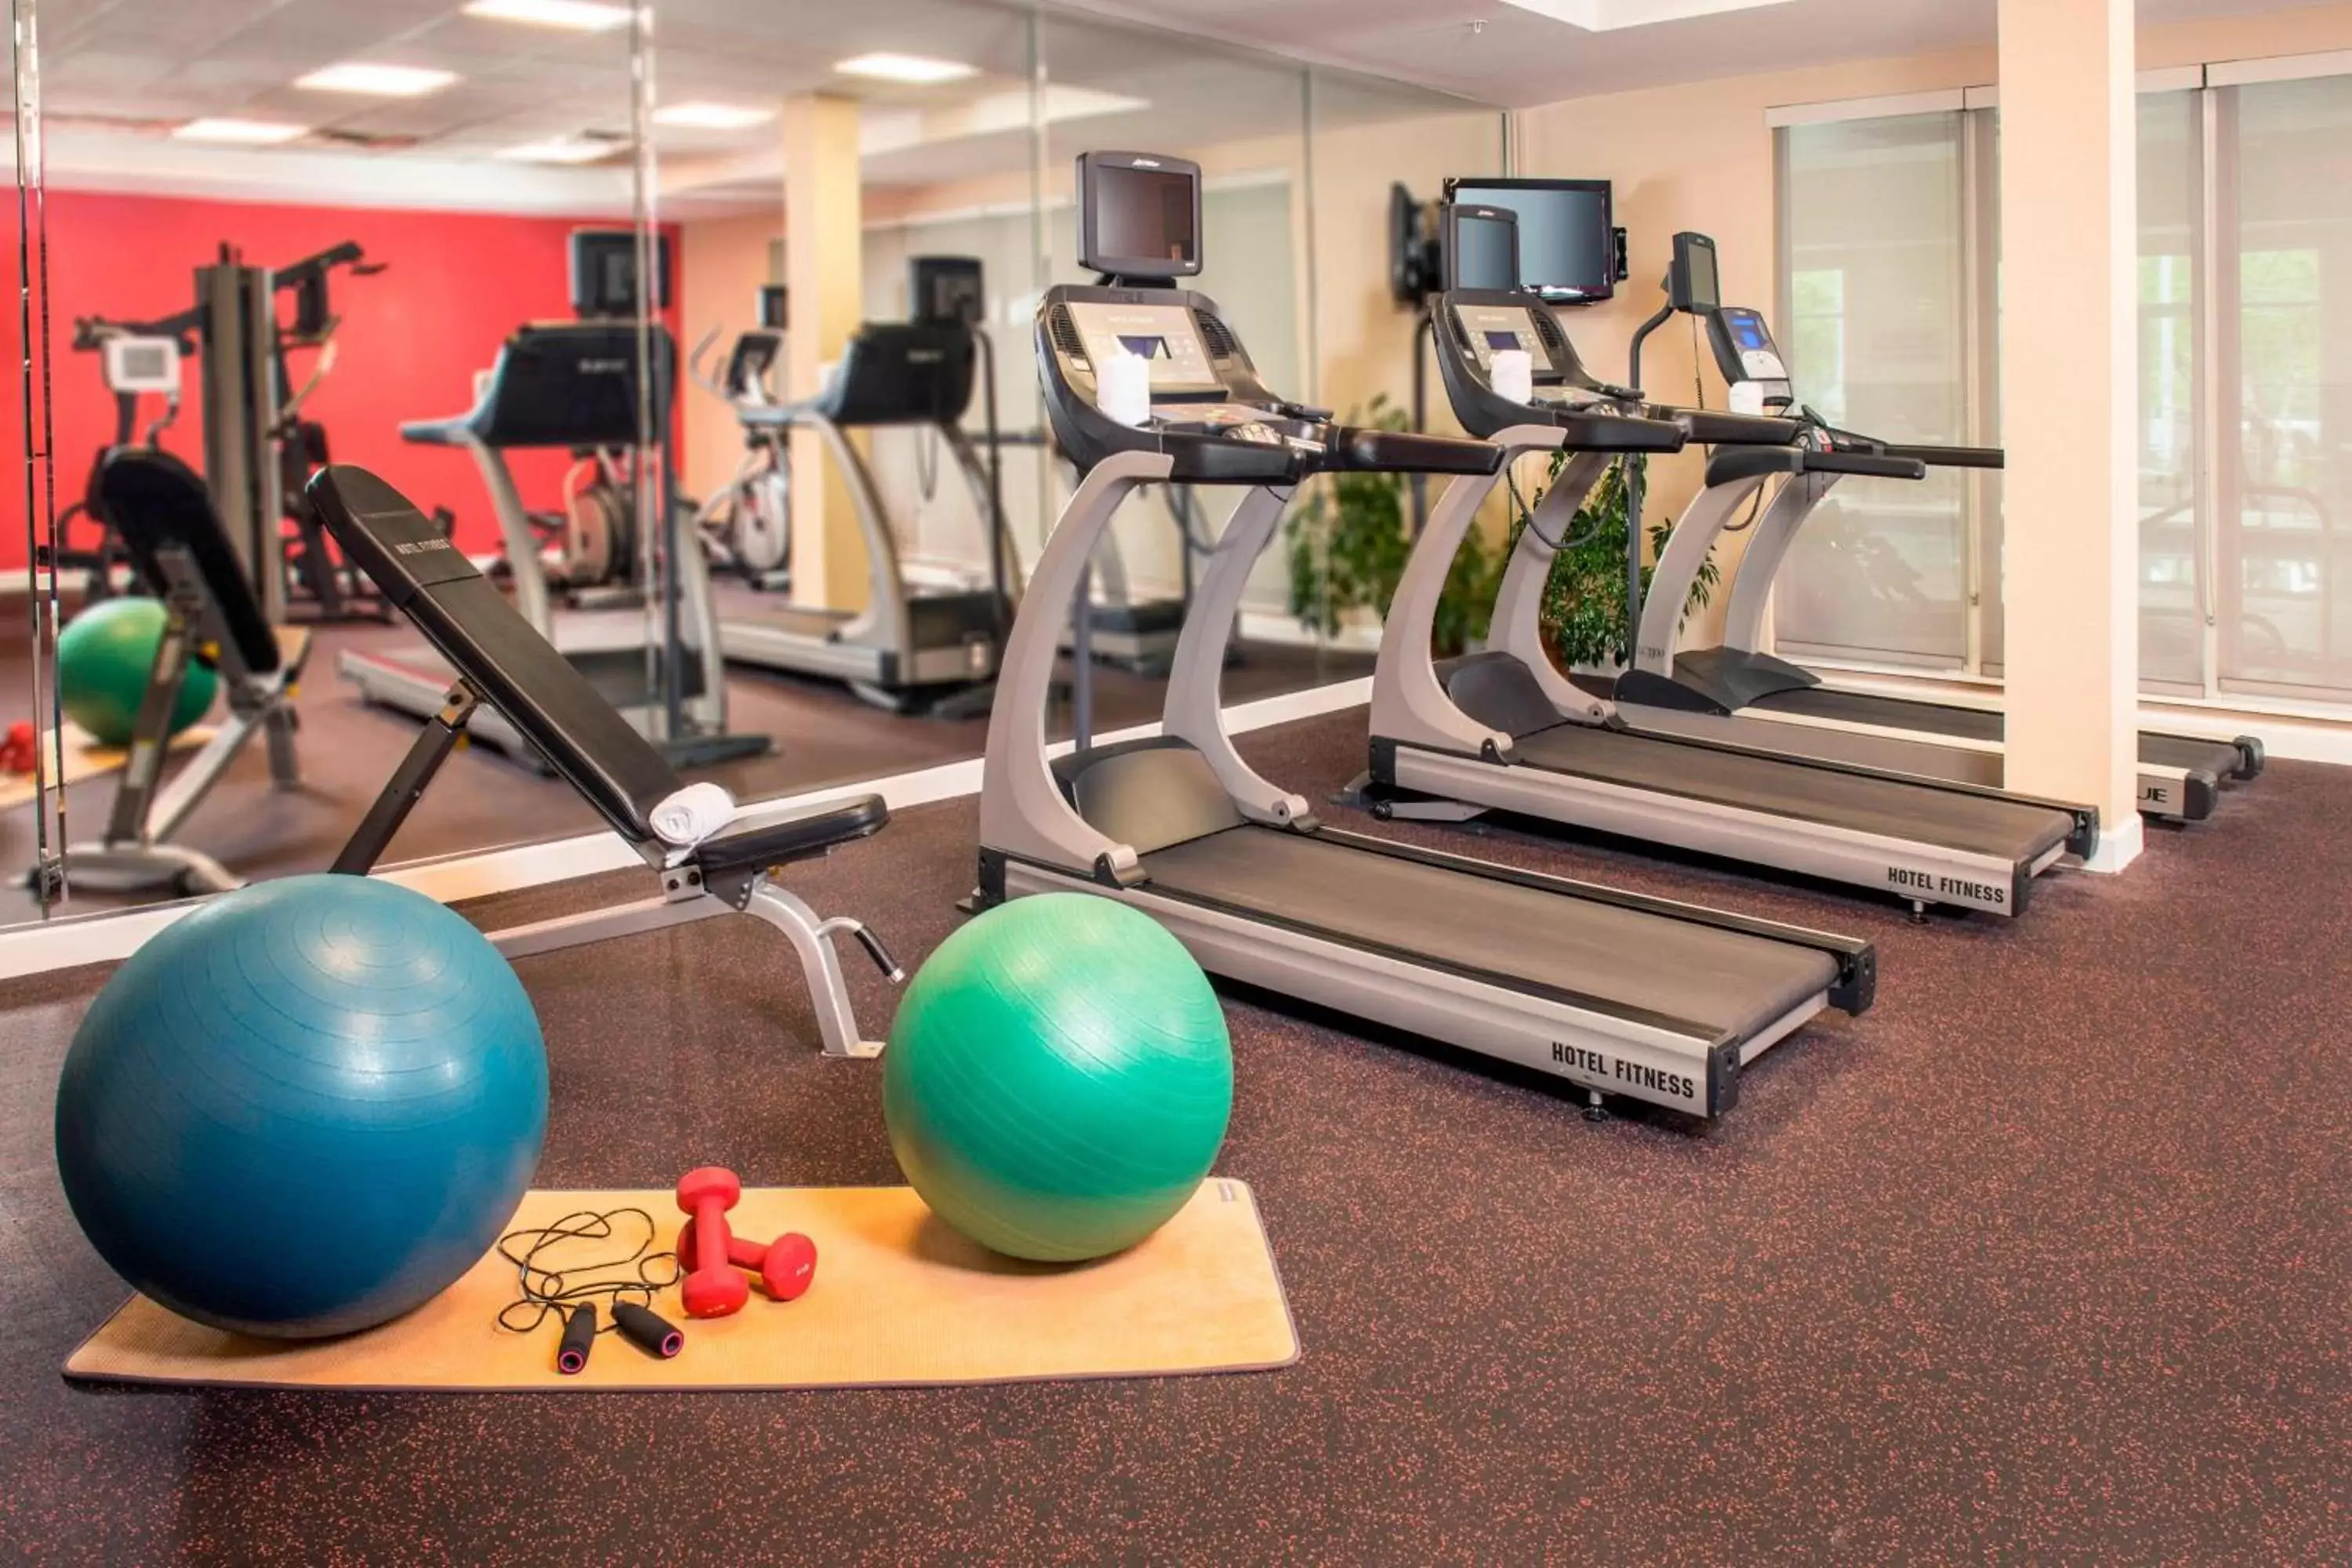 Fitness centre/facilities, Fitness Center/Facilities in TownePlace Suites by Marriott Clinton at Joint Base Andrews